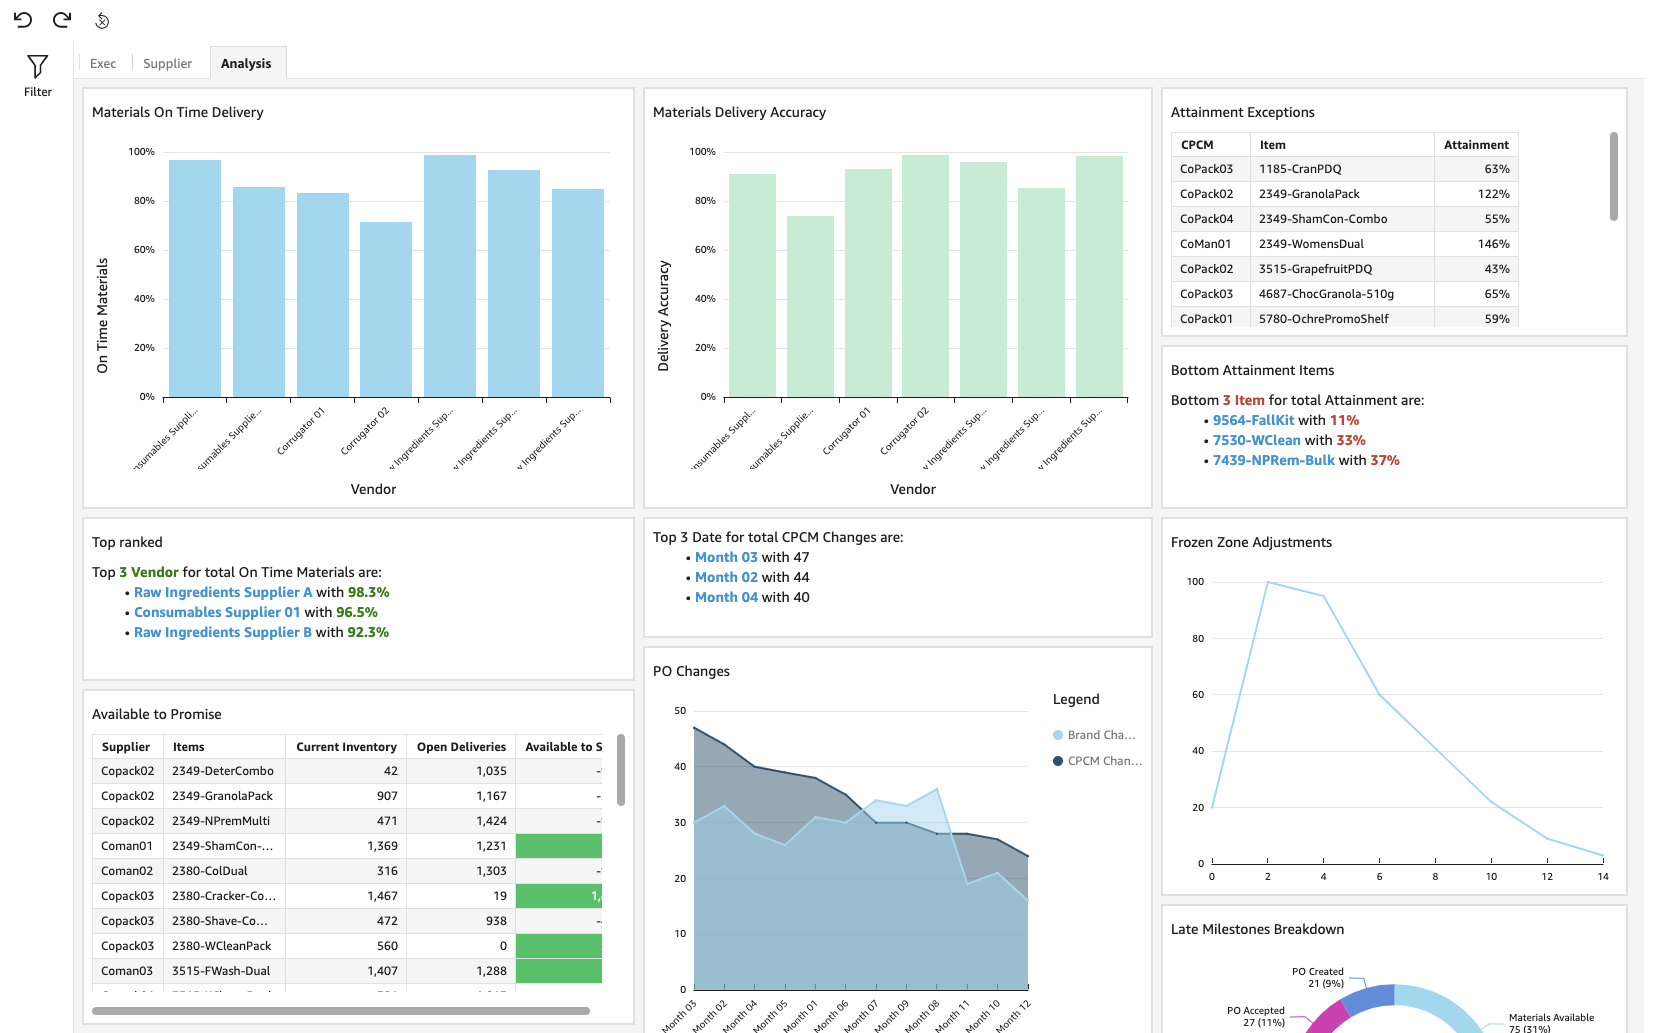 Analysis Dashboard that includes graphs for materials on time delivery, materials delivery accuracy, PO changes, frozen zone adjustments, and late milestones breakdowns. Also includes attainment exceptions, available to promise, & top ranked vendors